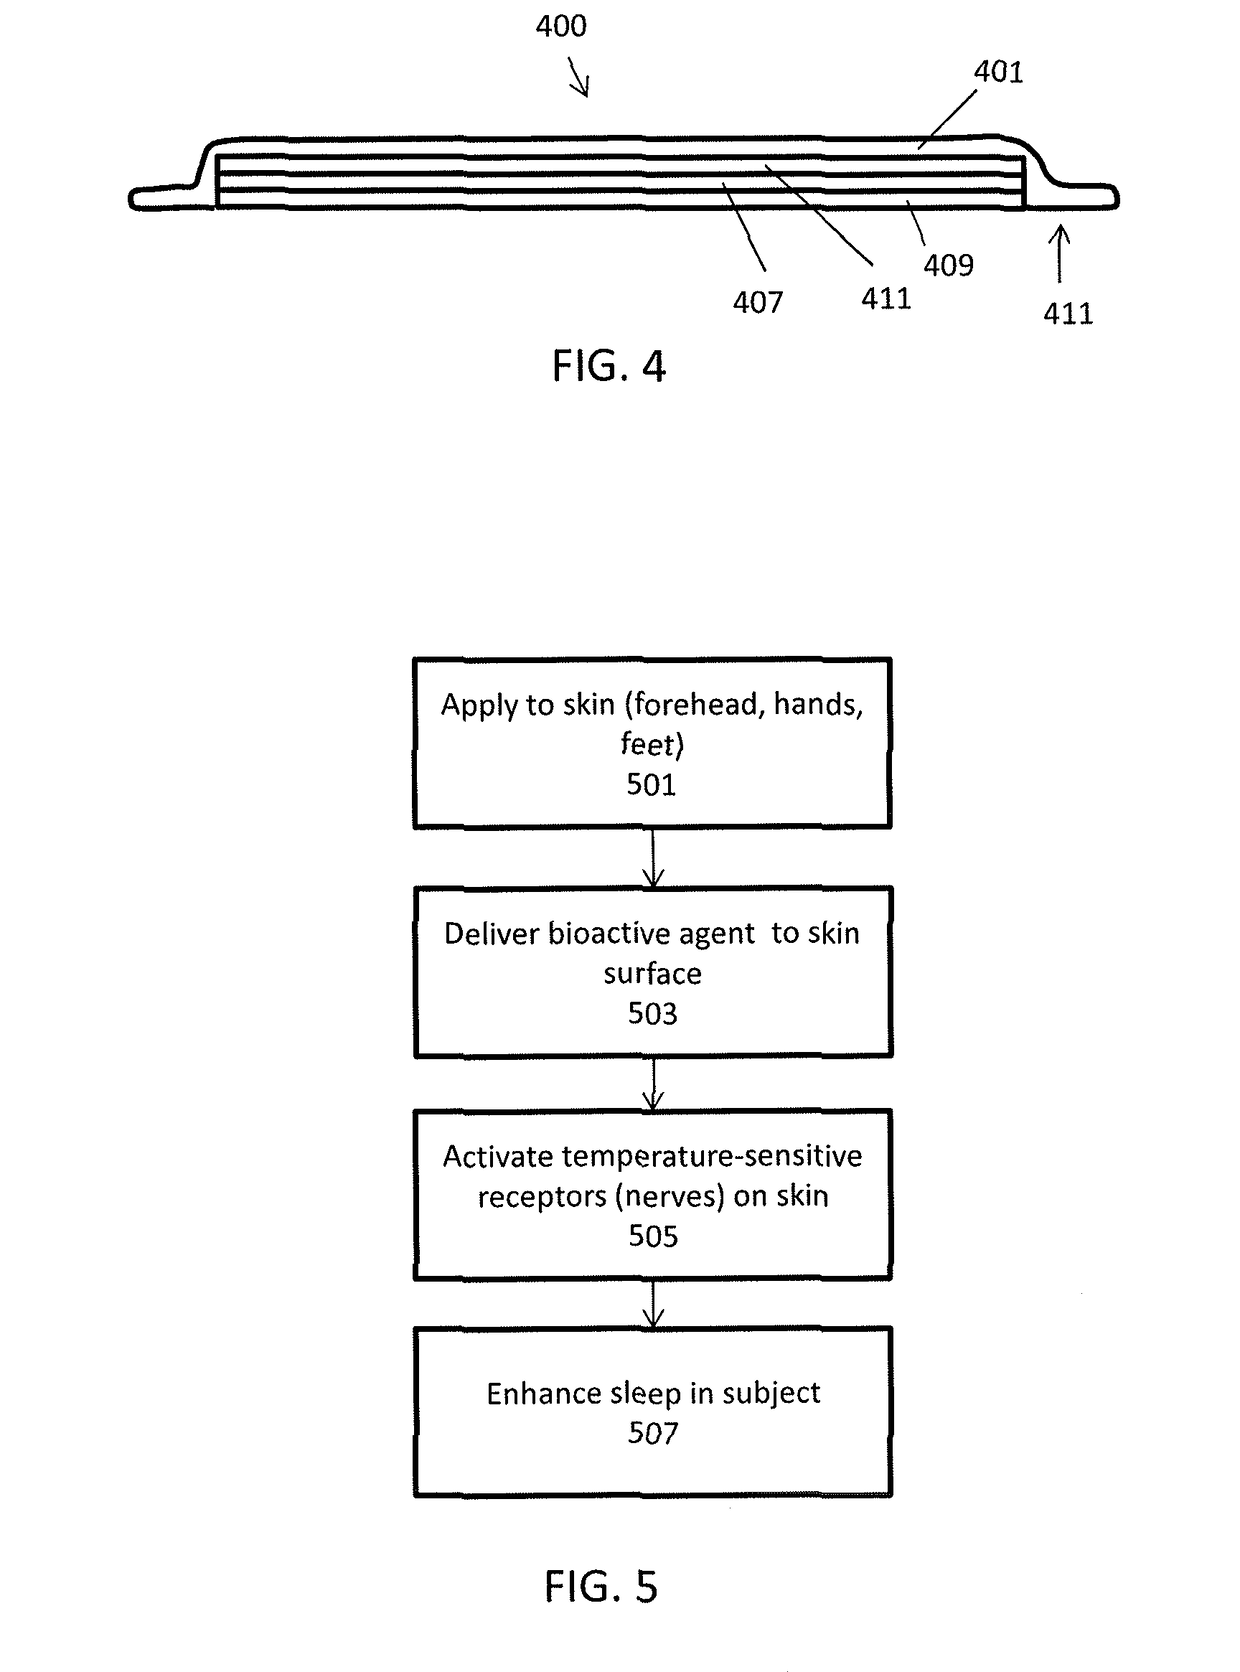 Method and apparatuses for modulating sleep by chemical activation of temperature receptors